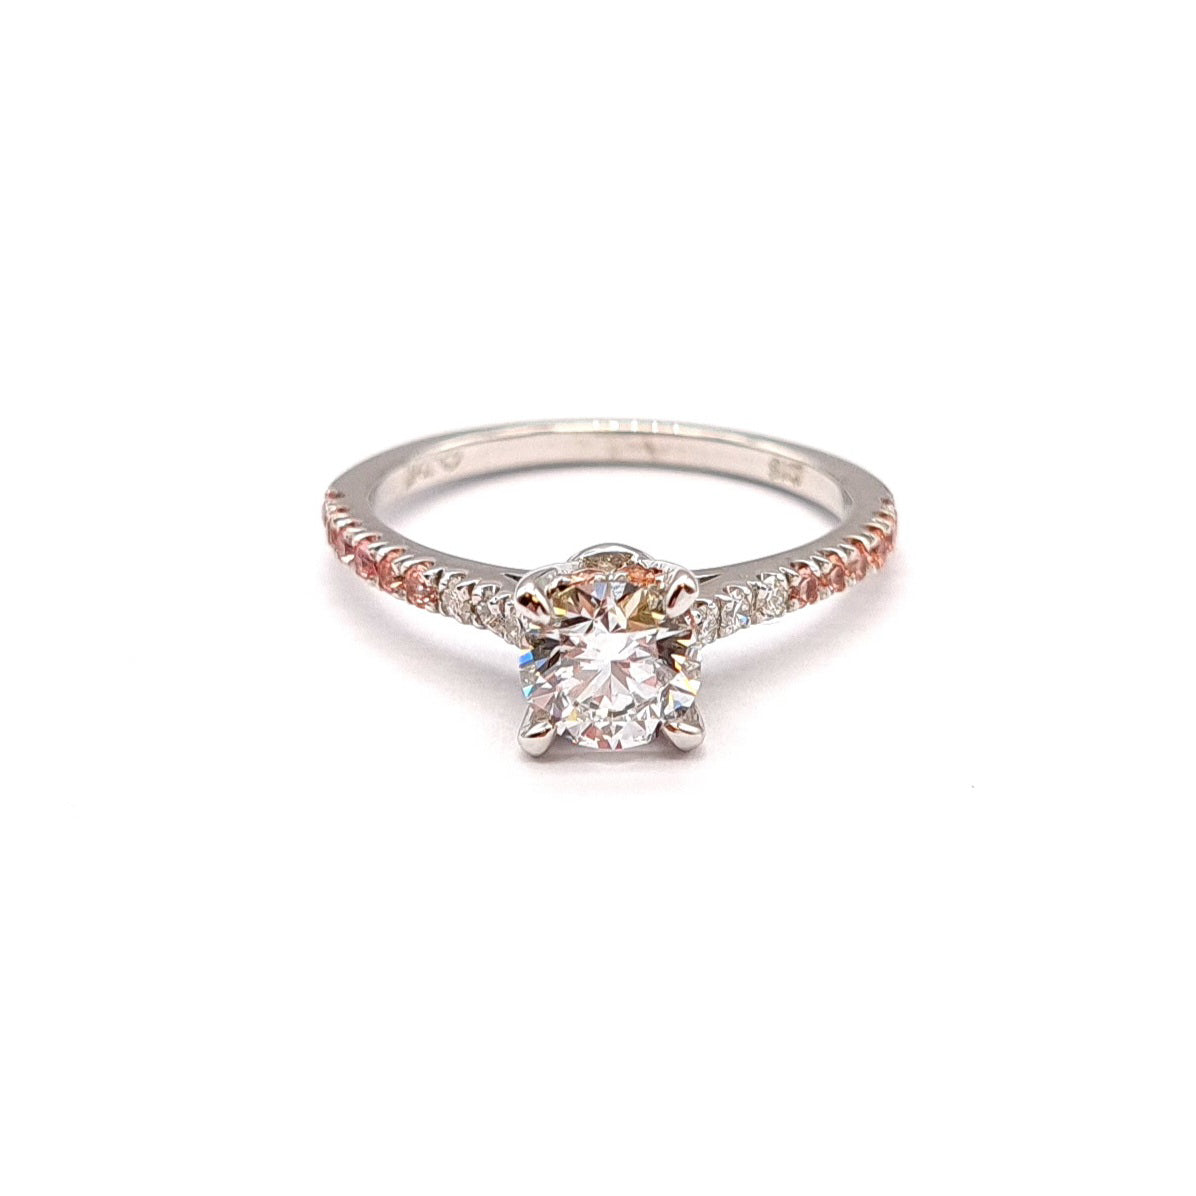 Hidden Halo Solitaire Diamond Ring with Peach Sapphires